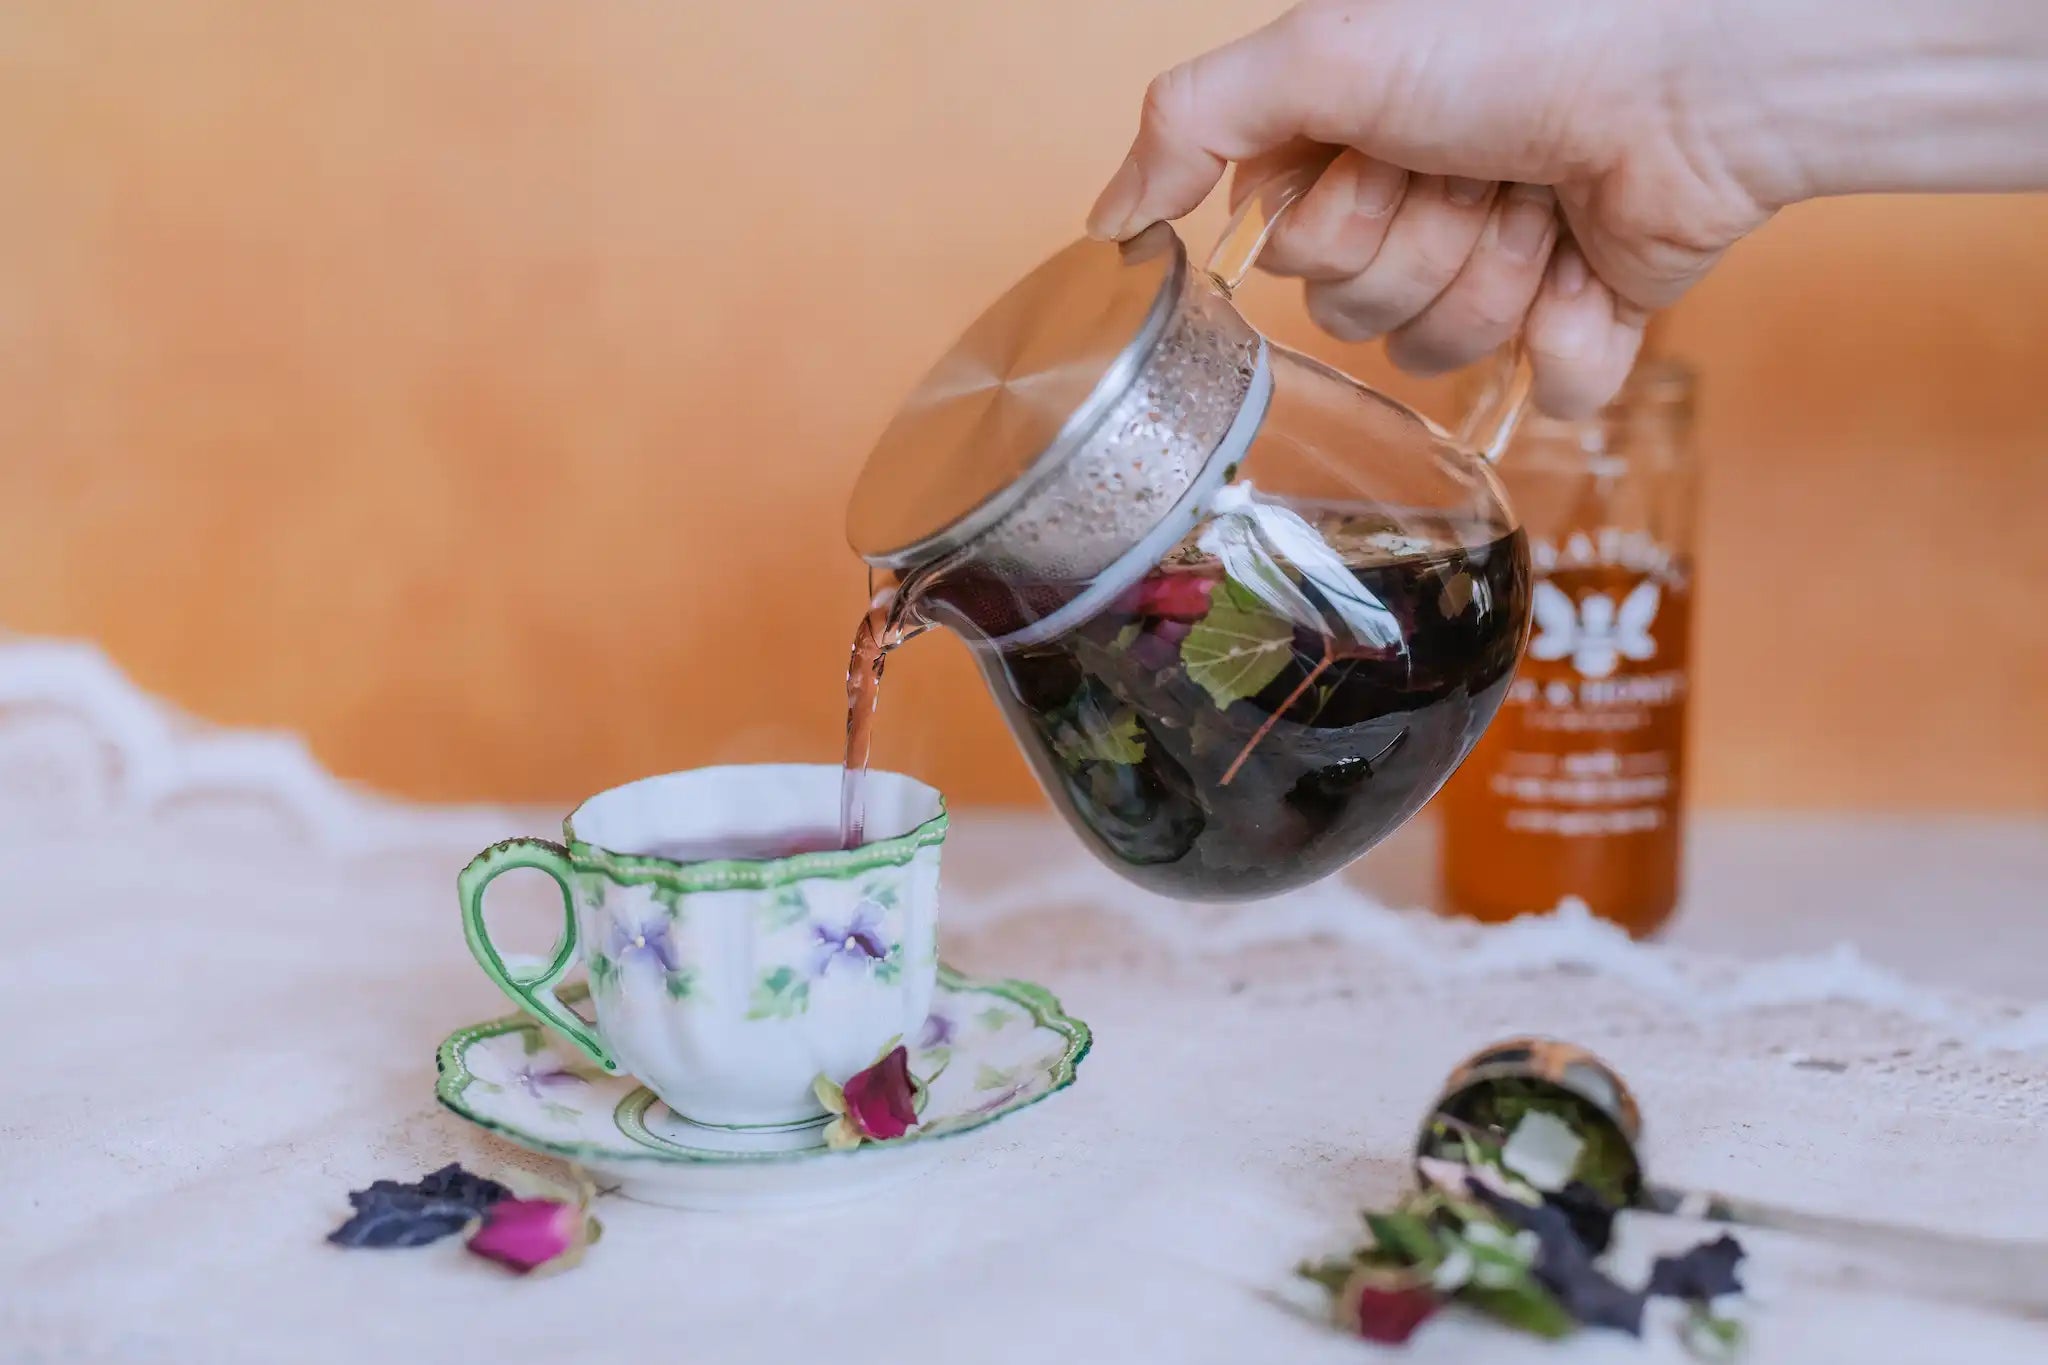 pouring purple herbal tisane la vie en rose from glass vetro teapot from Saratoga Tea & Honey Co into a vintage tea cup with spilled tea in foreground and jar of honey in the background